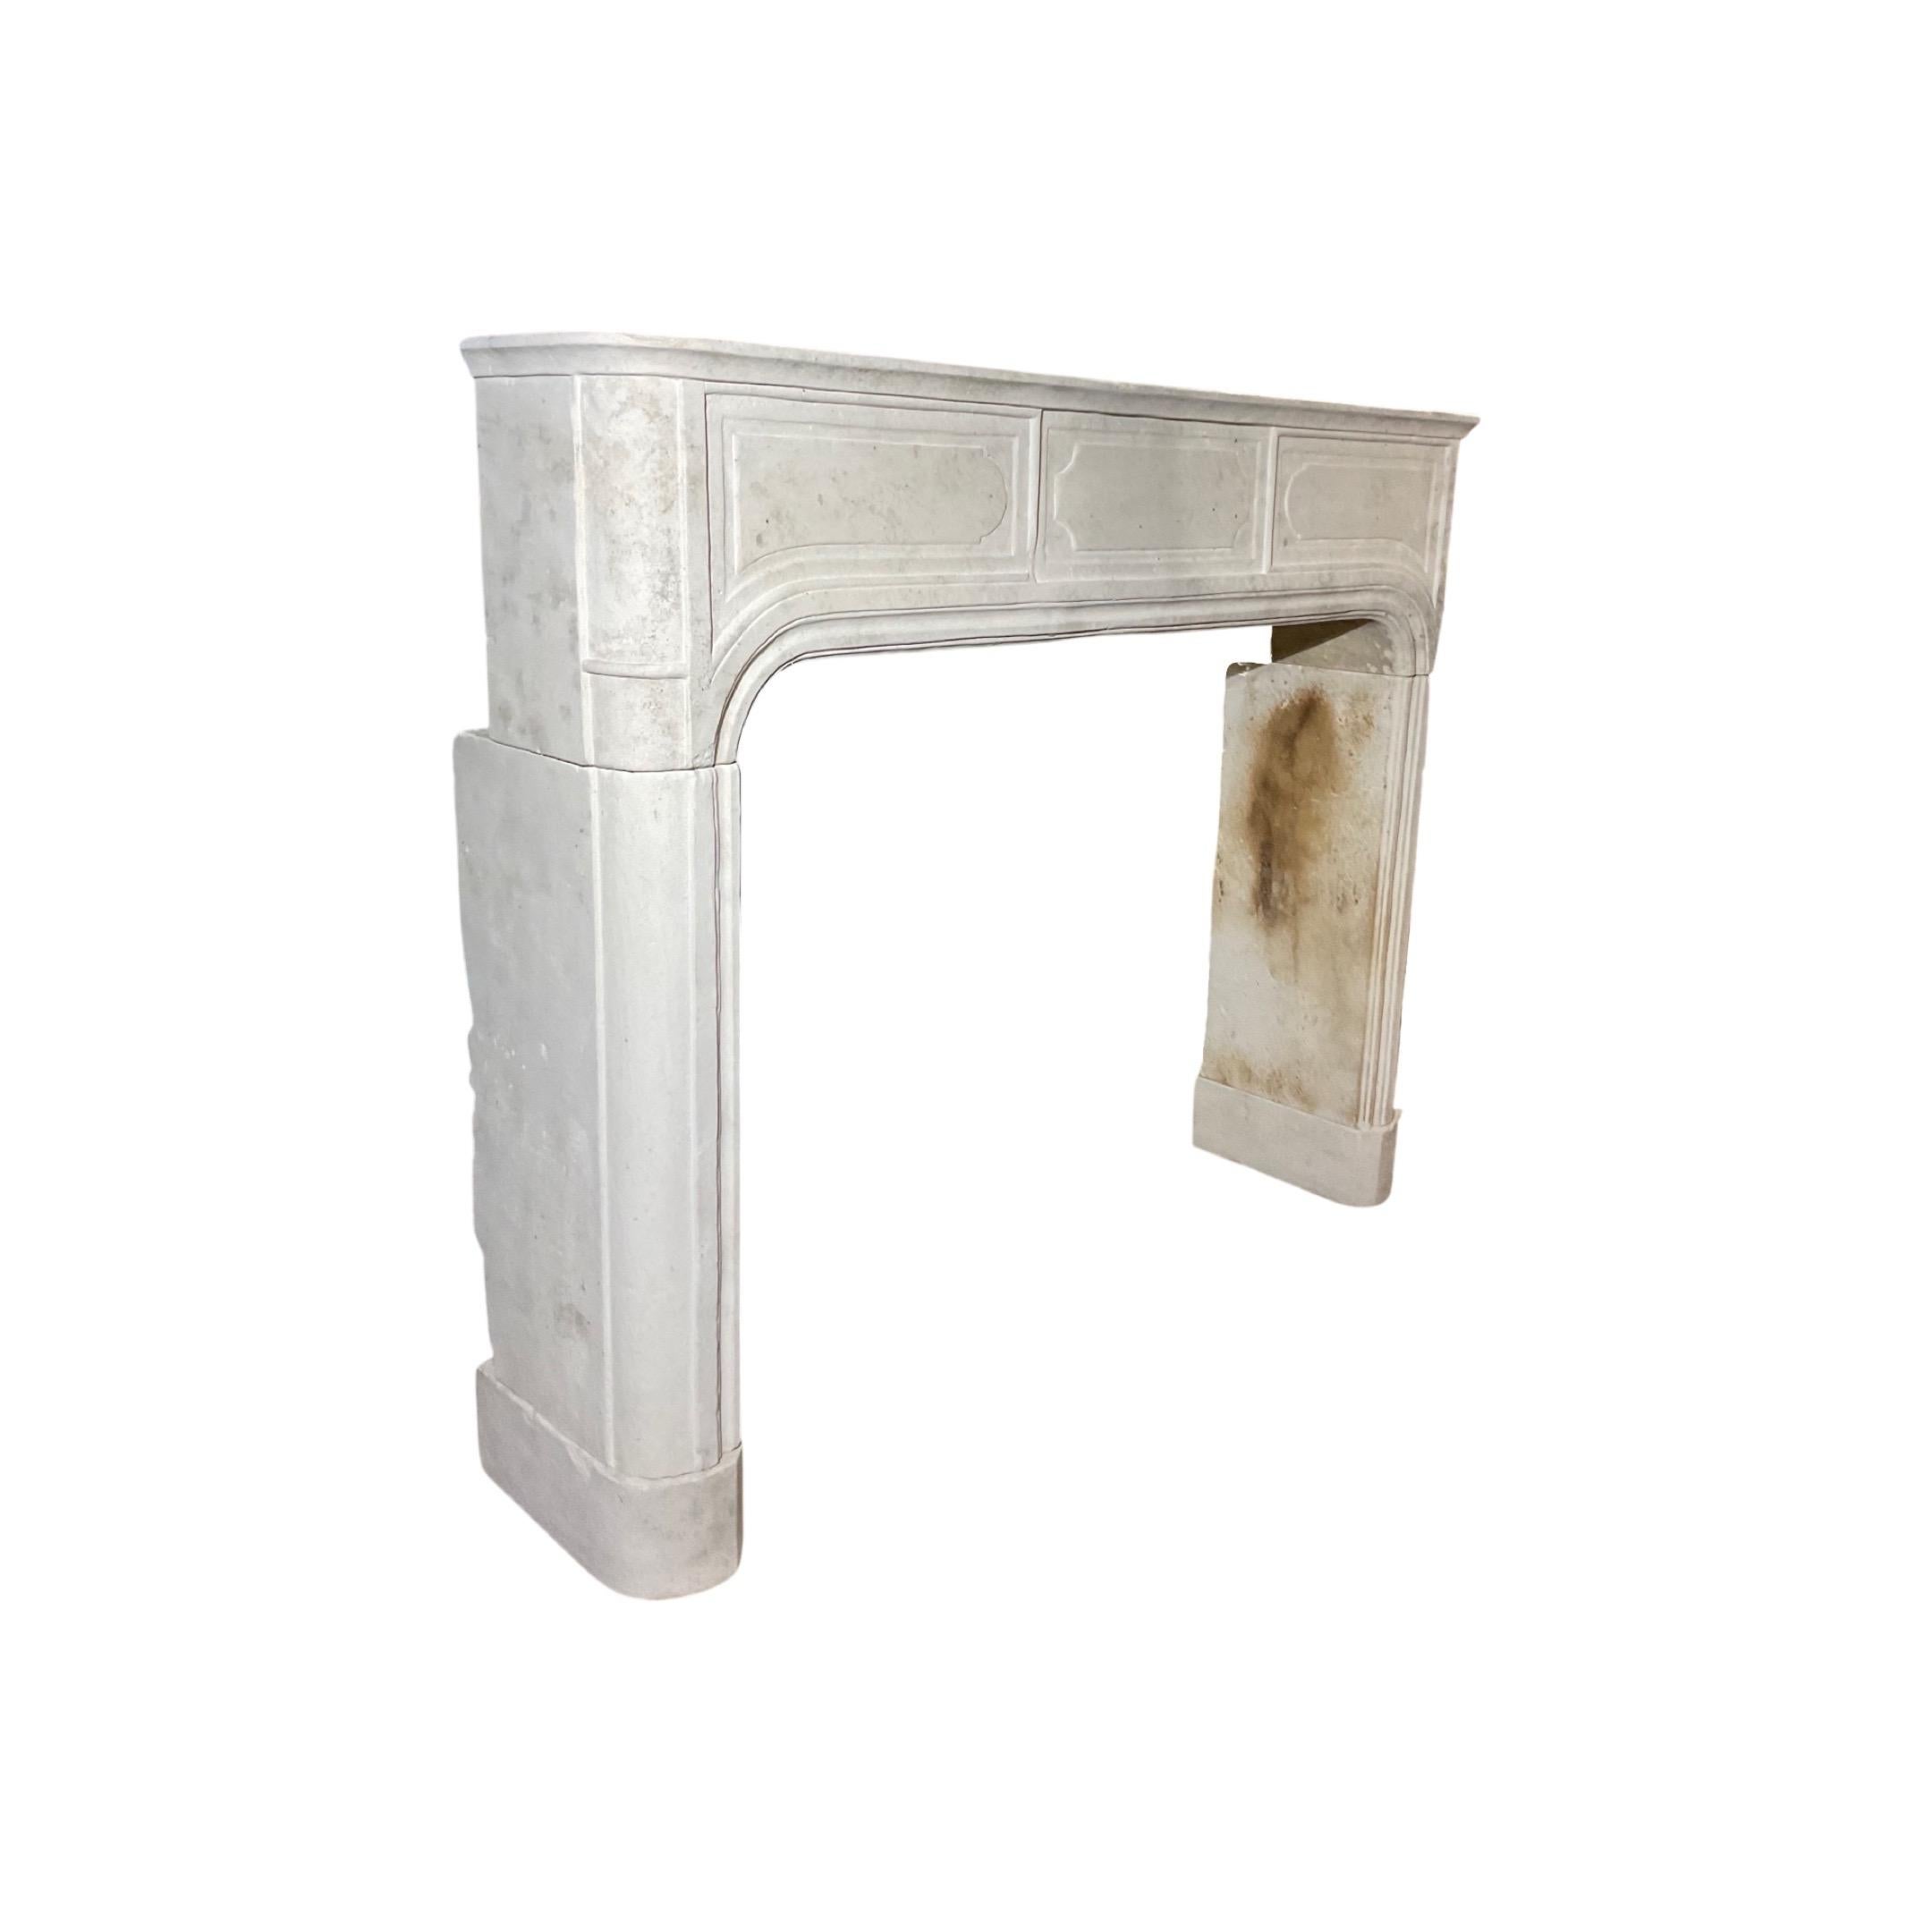 This classic French Limestone Mantel is a timeless piece with intricate Louis XVI style carvings. Crafted in the 1860s, it is a striking and elegant accent piece to any room. The limestone material ensures durability, providing a lasting centerpiece.